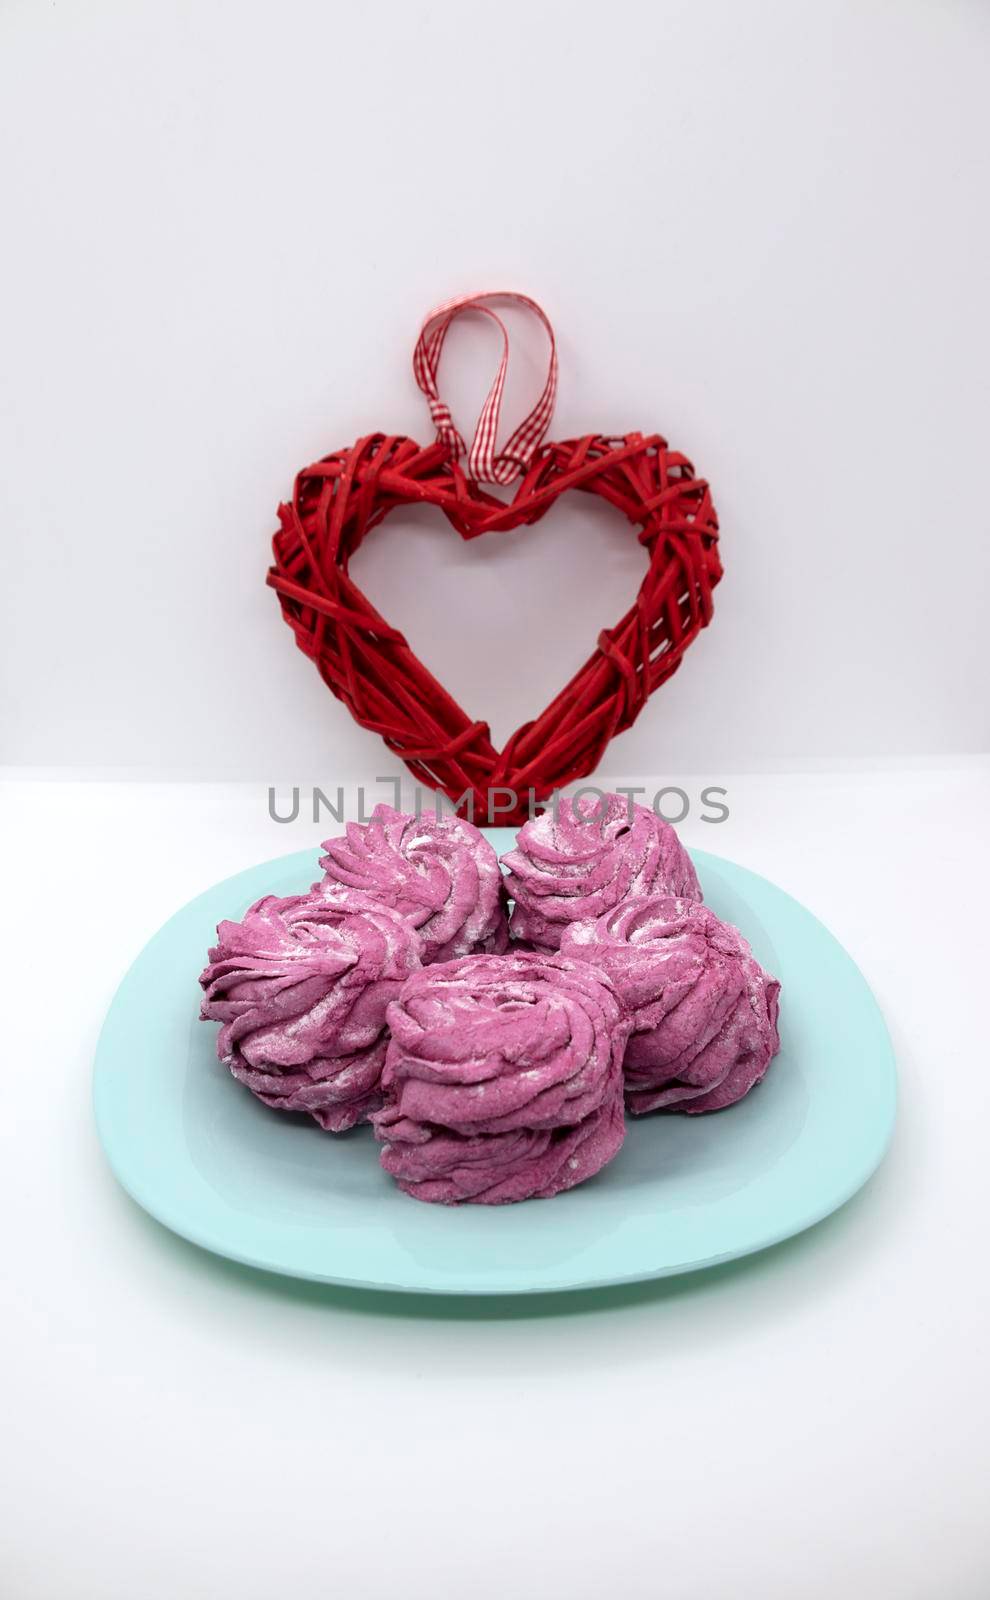 On a turquoise saucer, raspberry marshmallows for dessert with a heart for Valentine's Day.